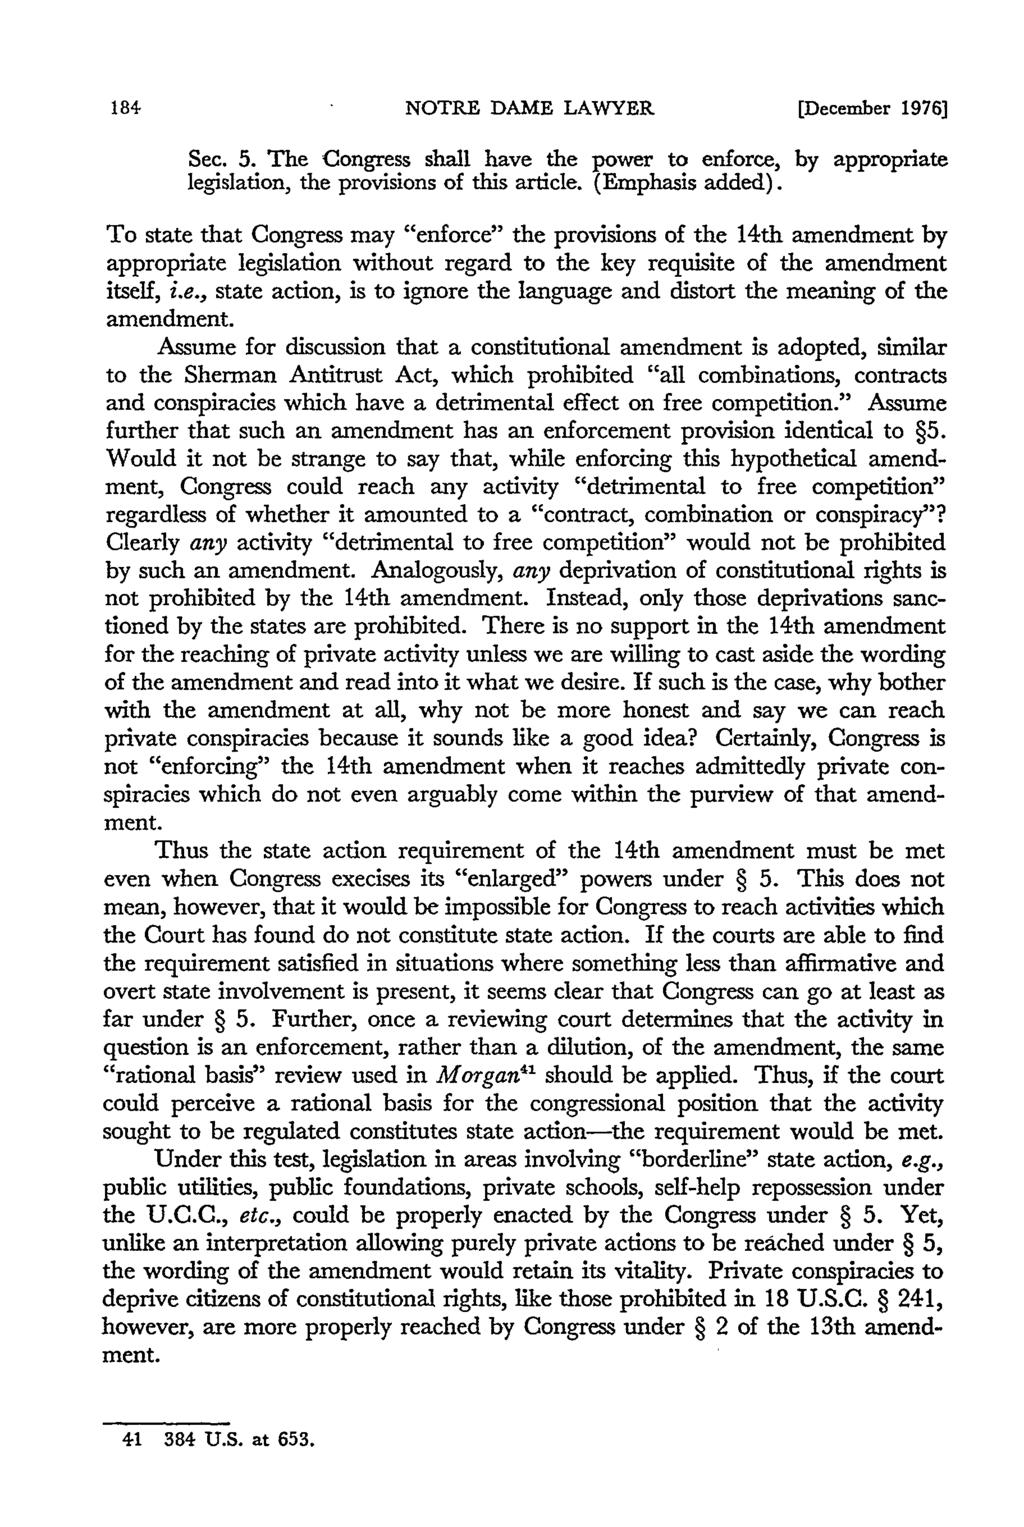 NOTRE DAME LAWYER [December 1976] Sec. 5. The Congress shall have the power to enforce, by appropriate legislation, the provisions of this article. (Emphasis added).